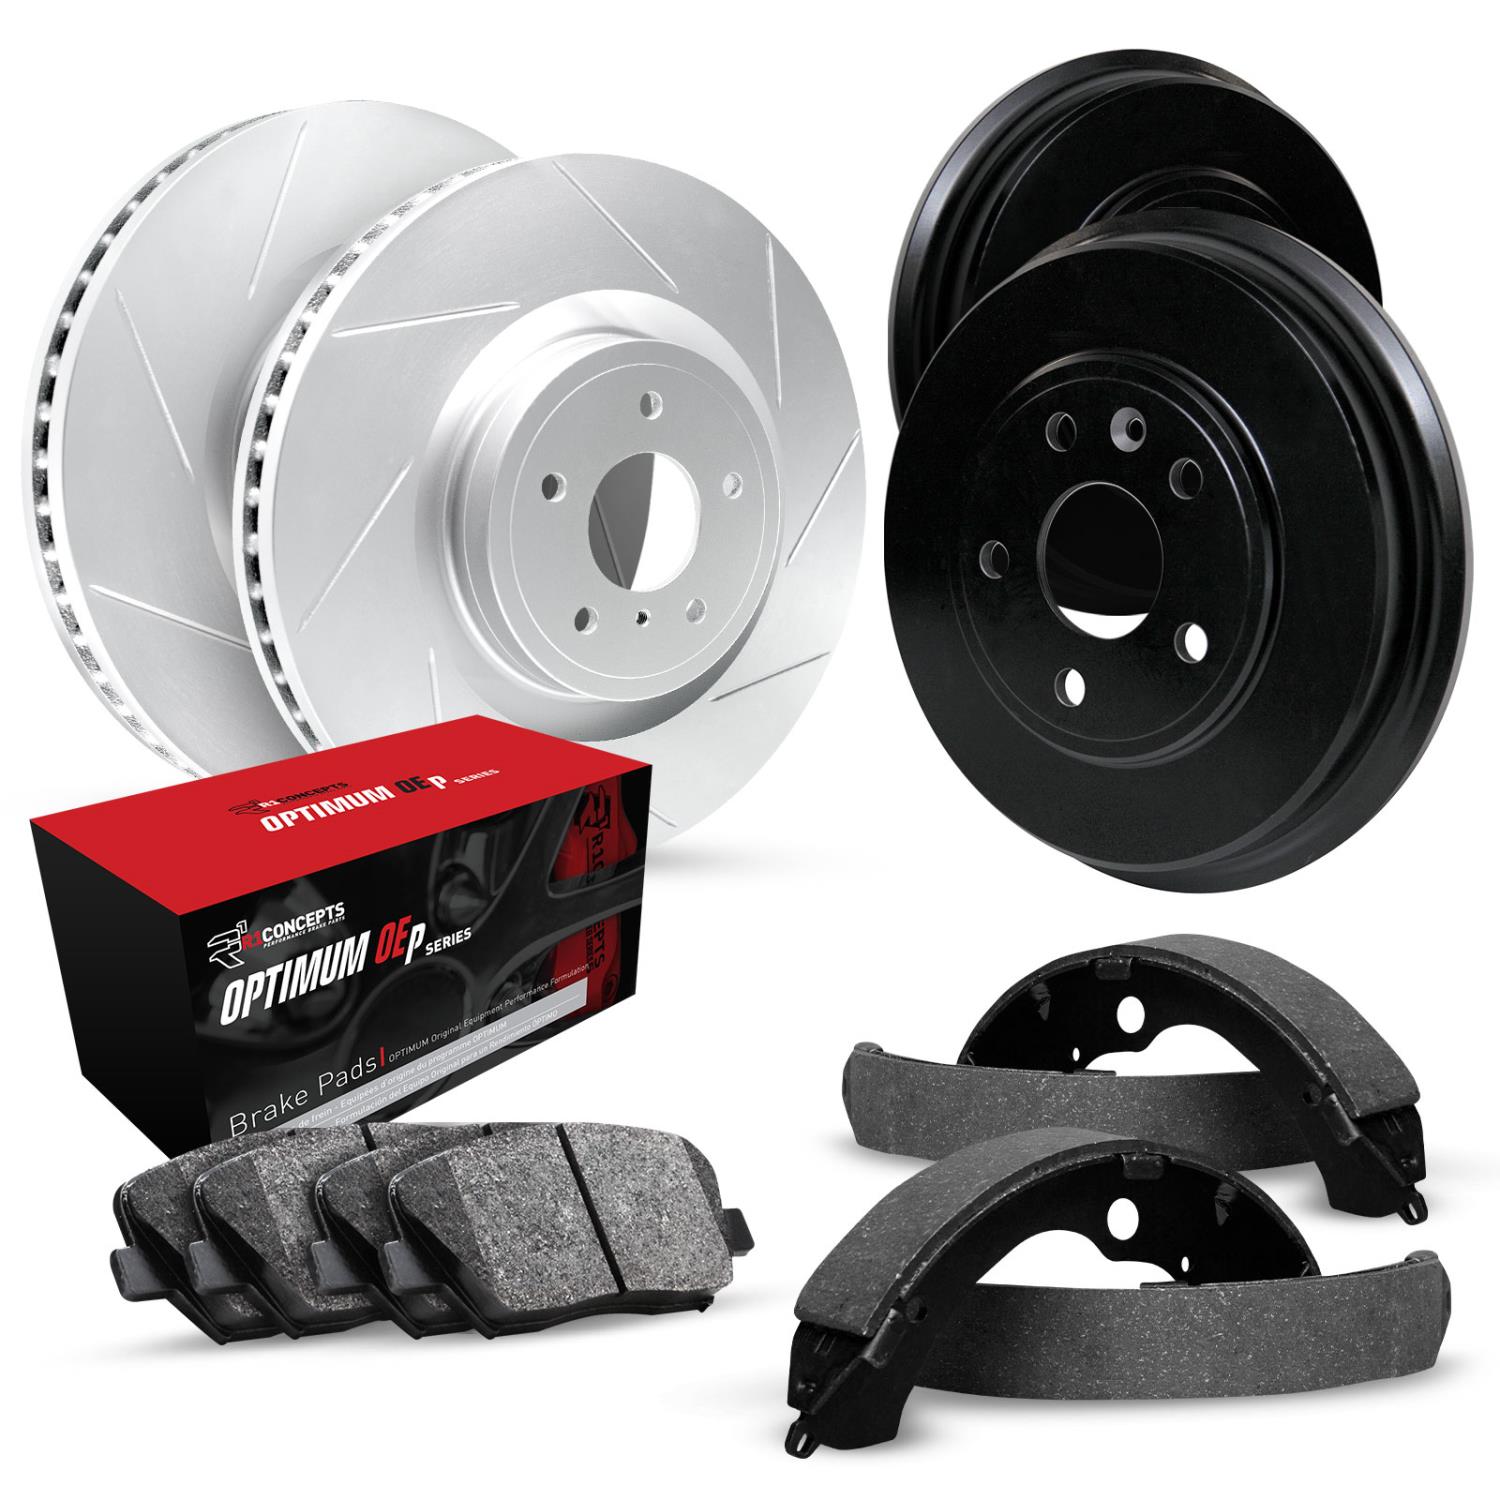 GEO-Carbon Slotted Brake Rotor & Drum Set w/Optimum OE Pads & Shoes, 1988-1989 GM, Position: Front & Rear